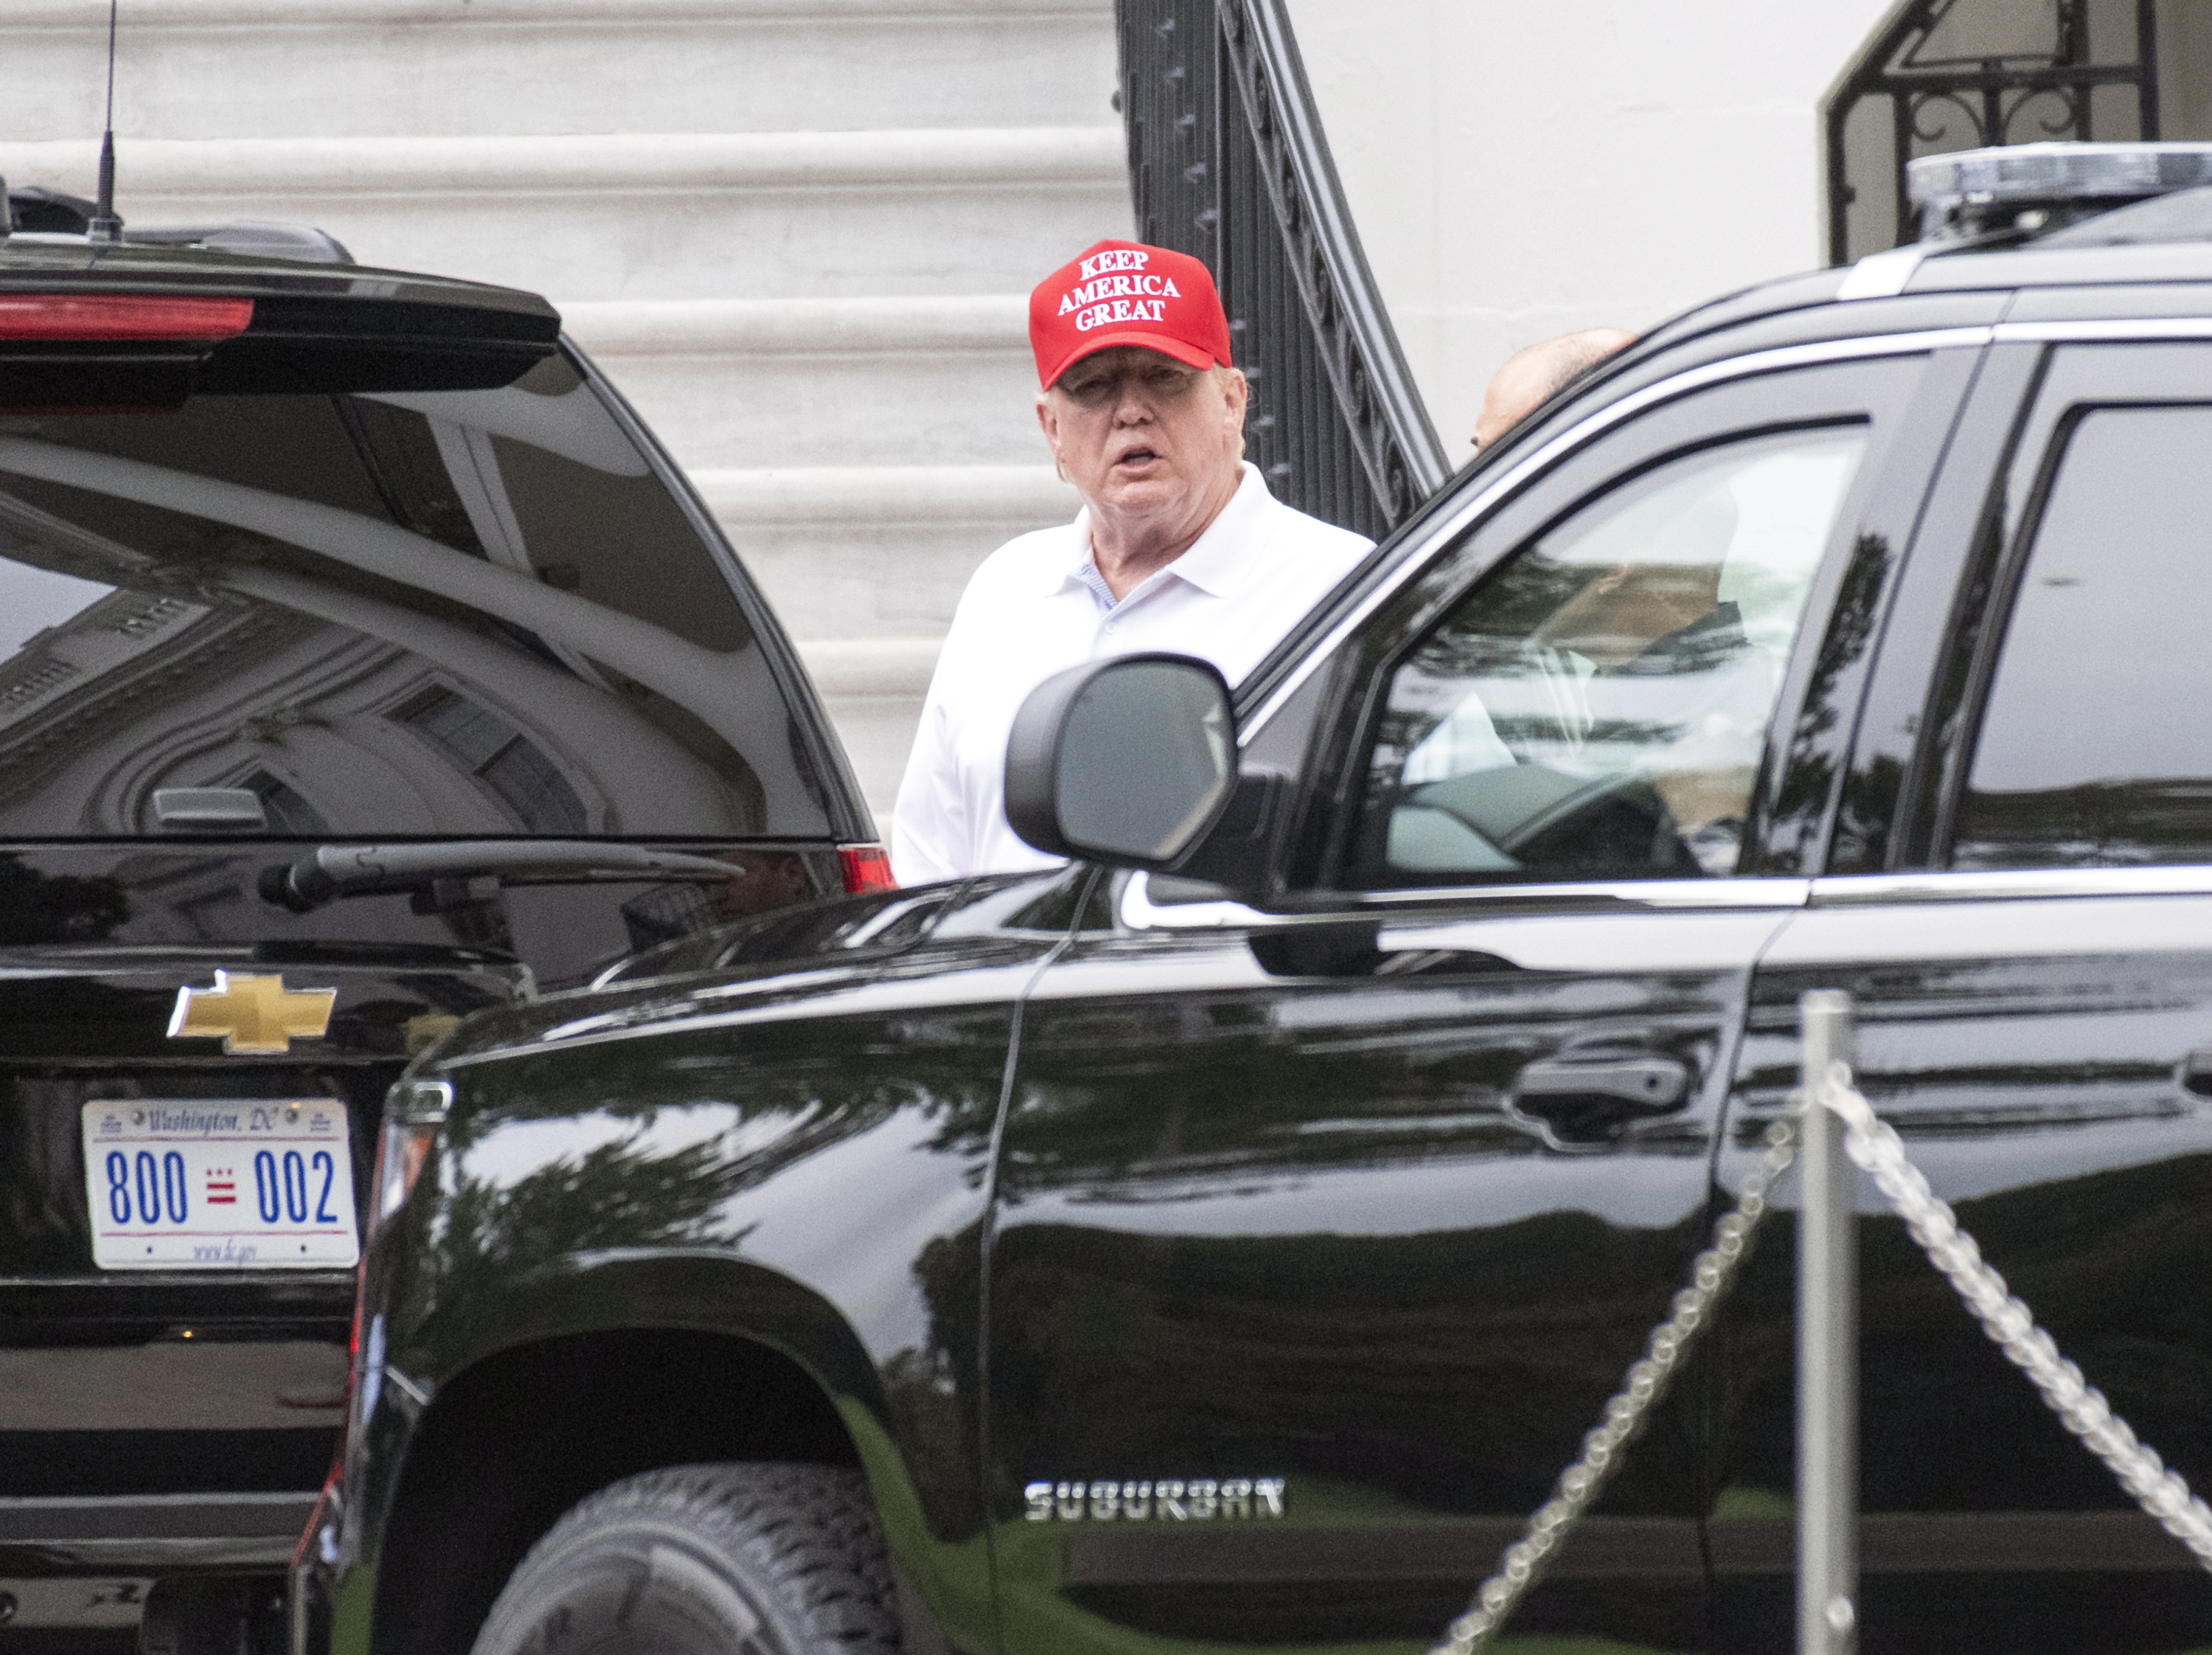 epa07842240 US President Donald J. Trump (C), wearing a red baseball cap with white letters that read 'Keep America Great.', departs the White House en route to the Trump National Golf Club in Sterling, Virginia, in Washington, DC, USA, 14 September 2019.  EPA/RON SACHS / POOL